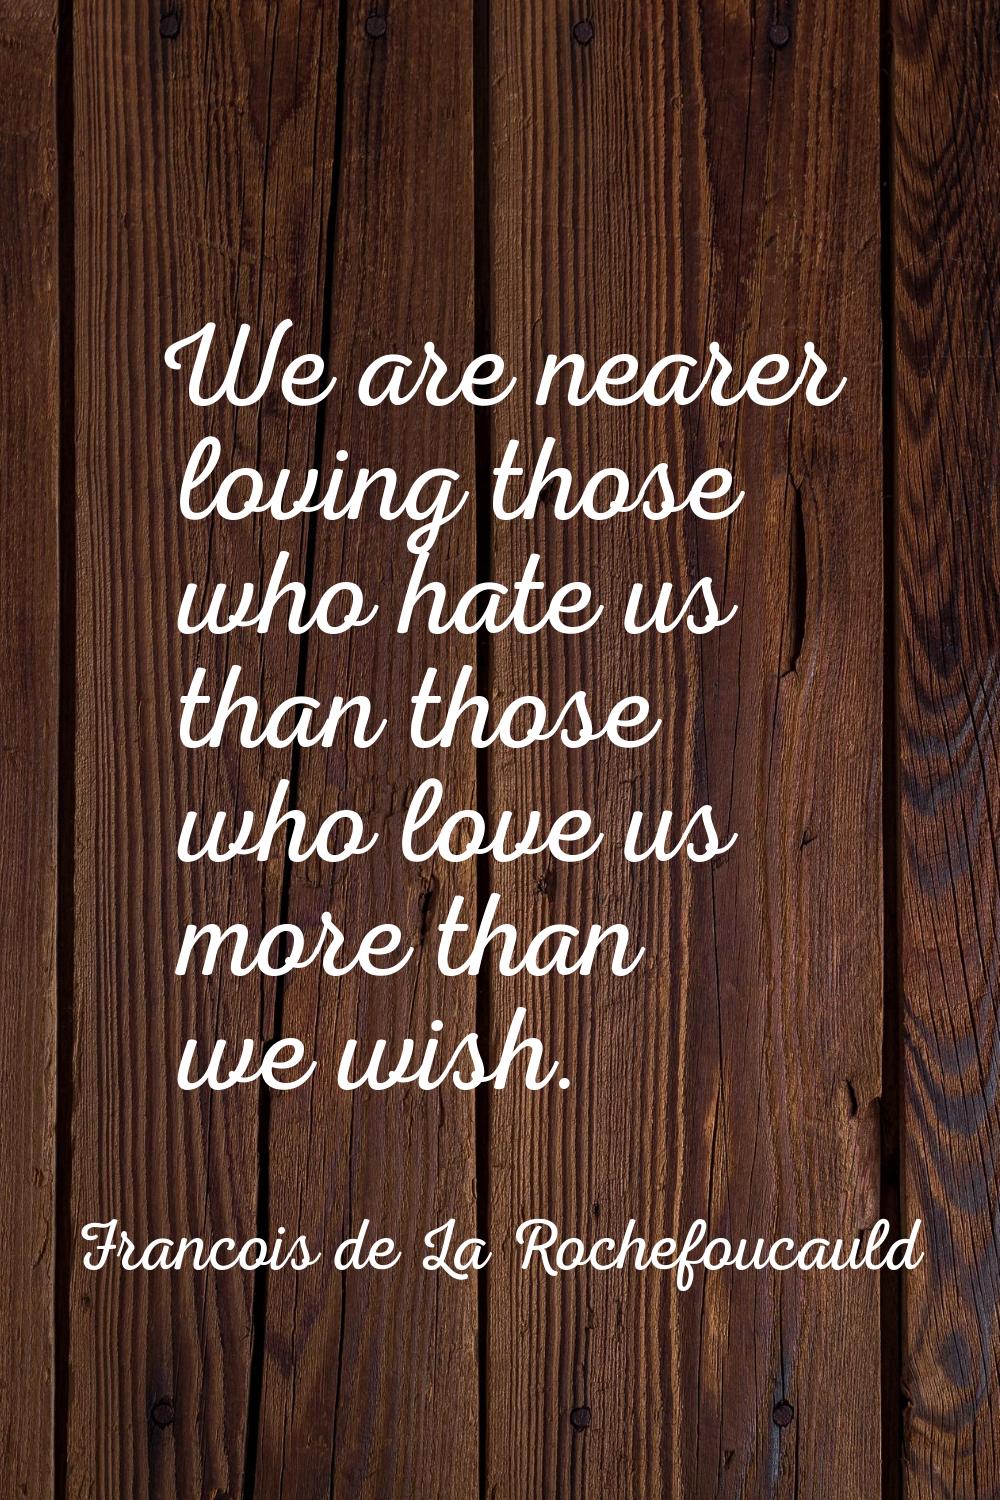 We are nearer loving those who hate us than those who love us more than we wish.